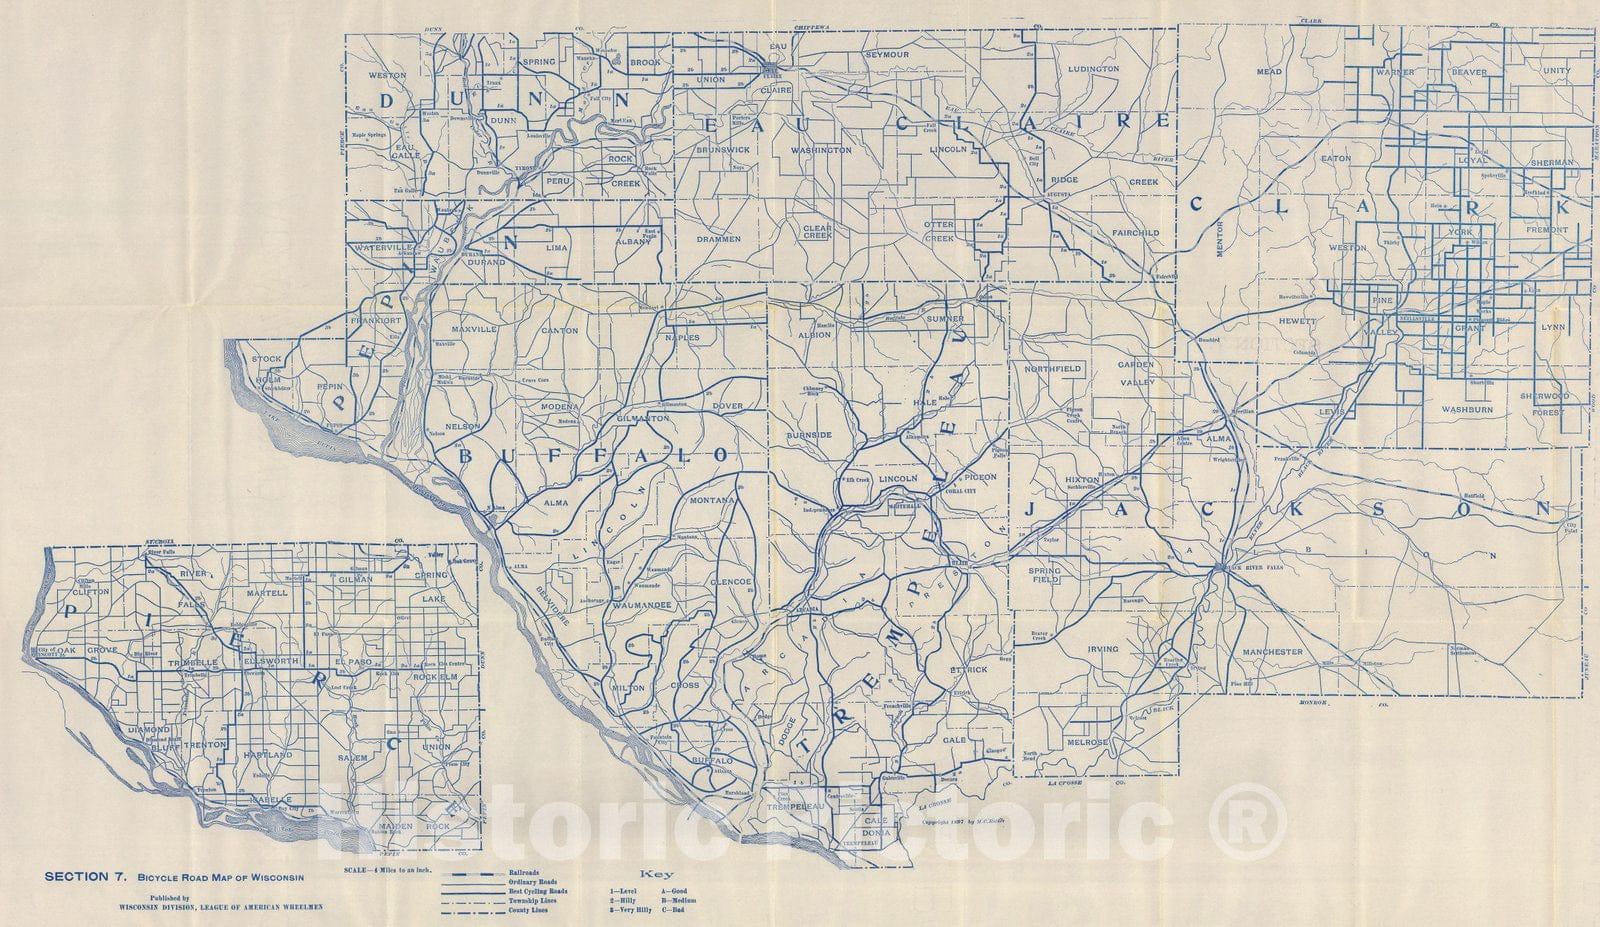 Historic Map : Section 7. Bicycle Road Map of Wisconsin, 1897 - Vintage Wall Art